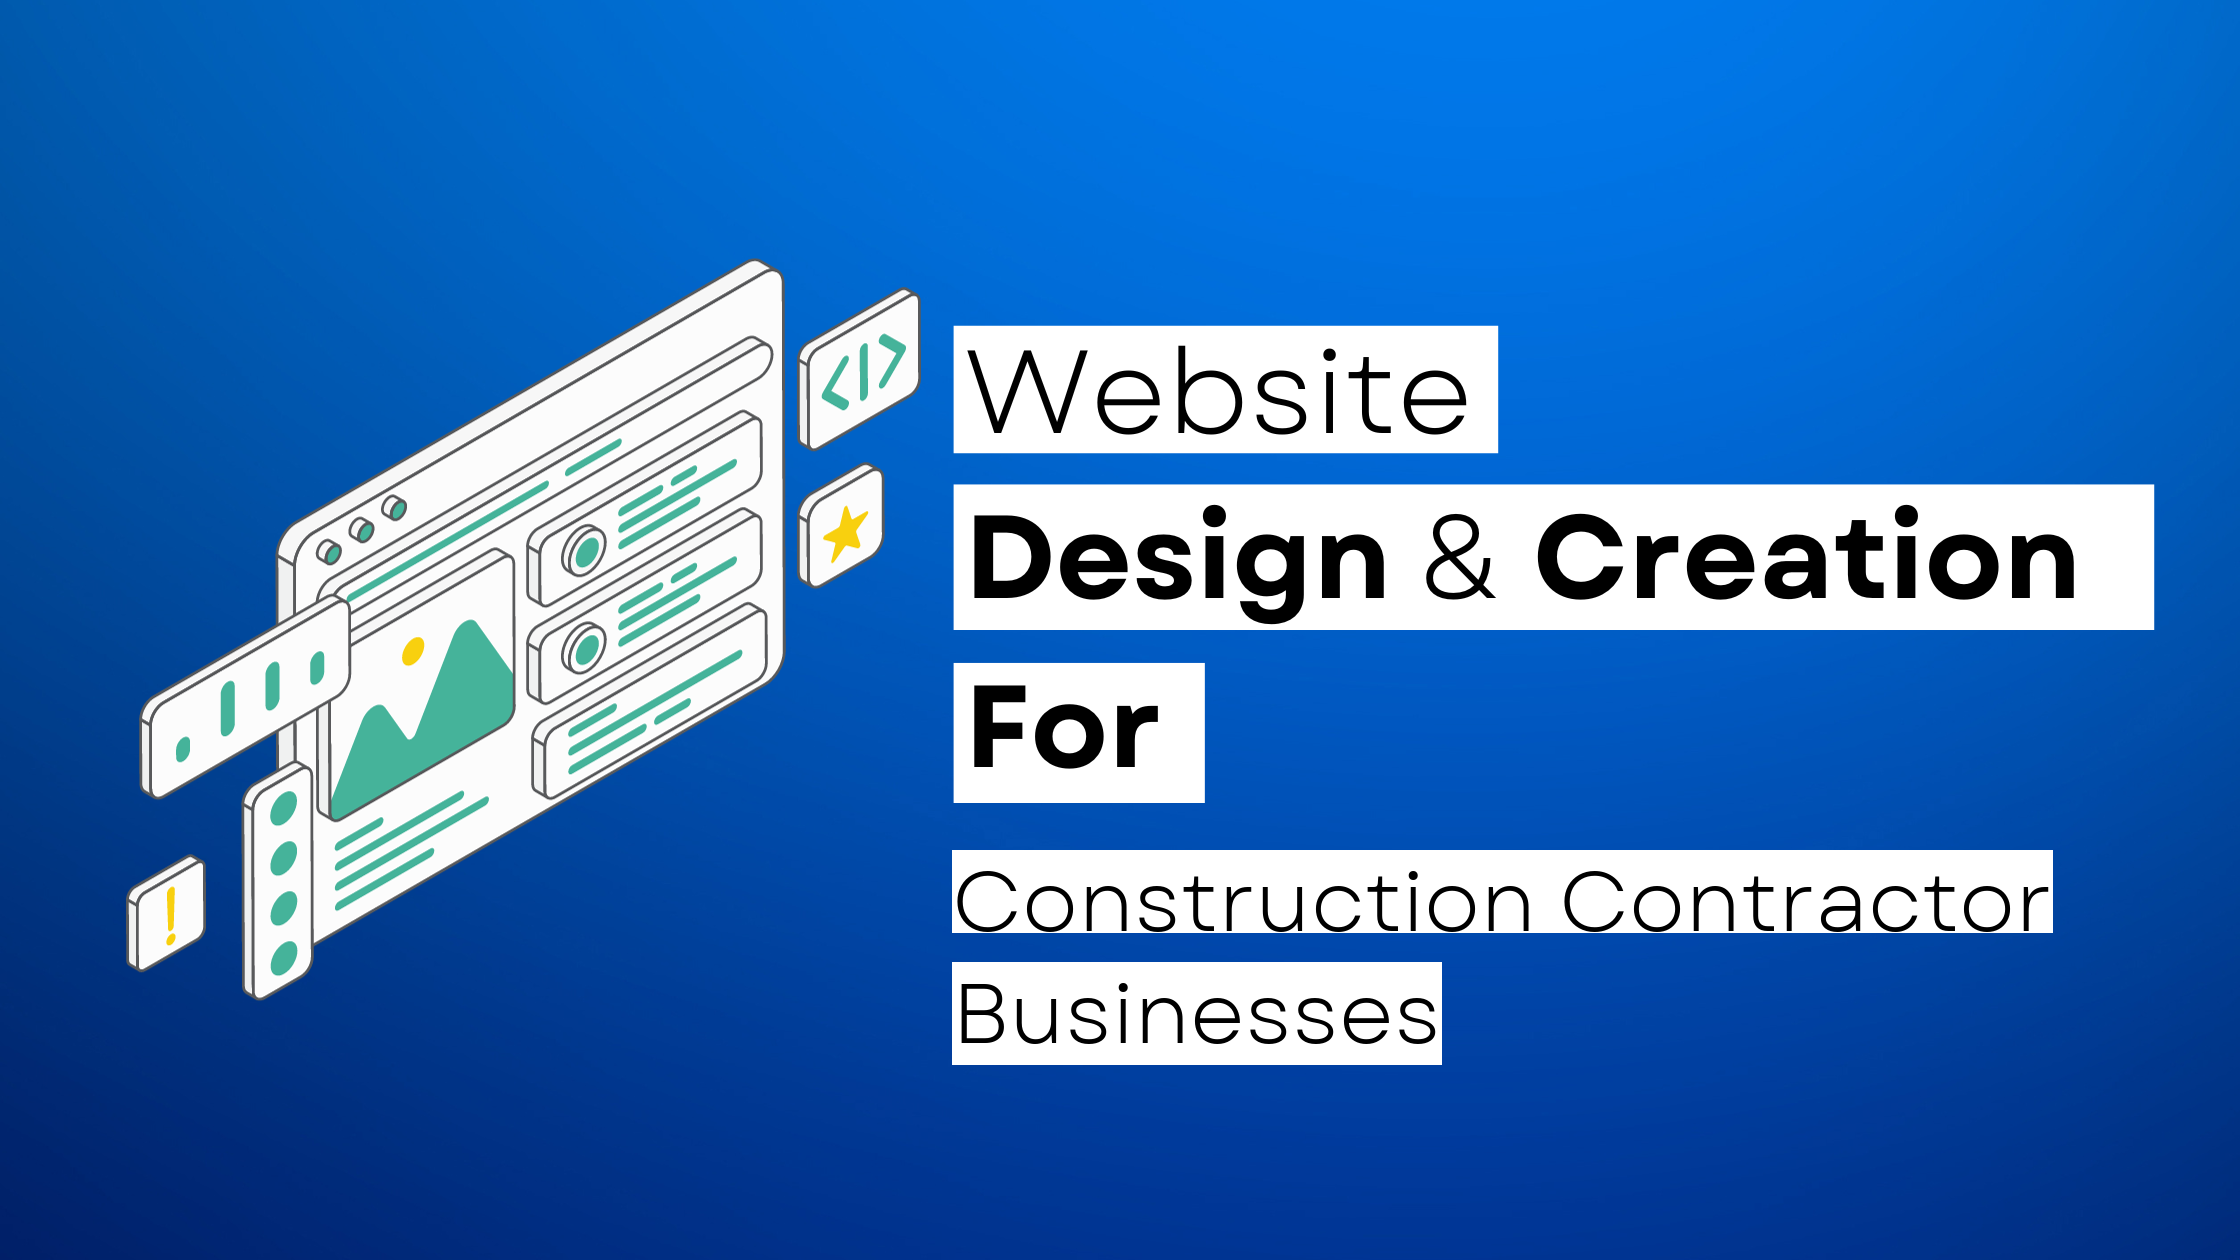 How to start a Construction Contractor website